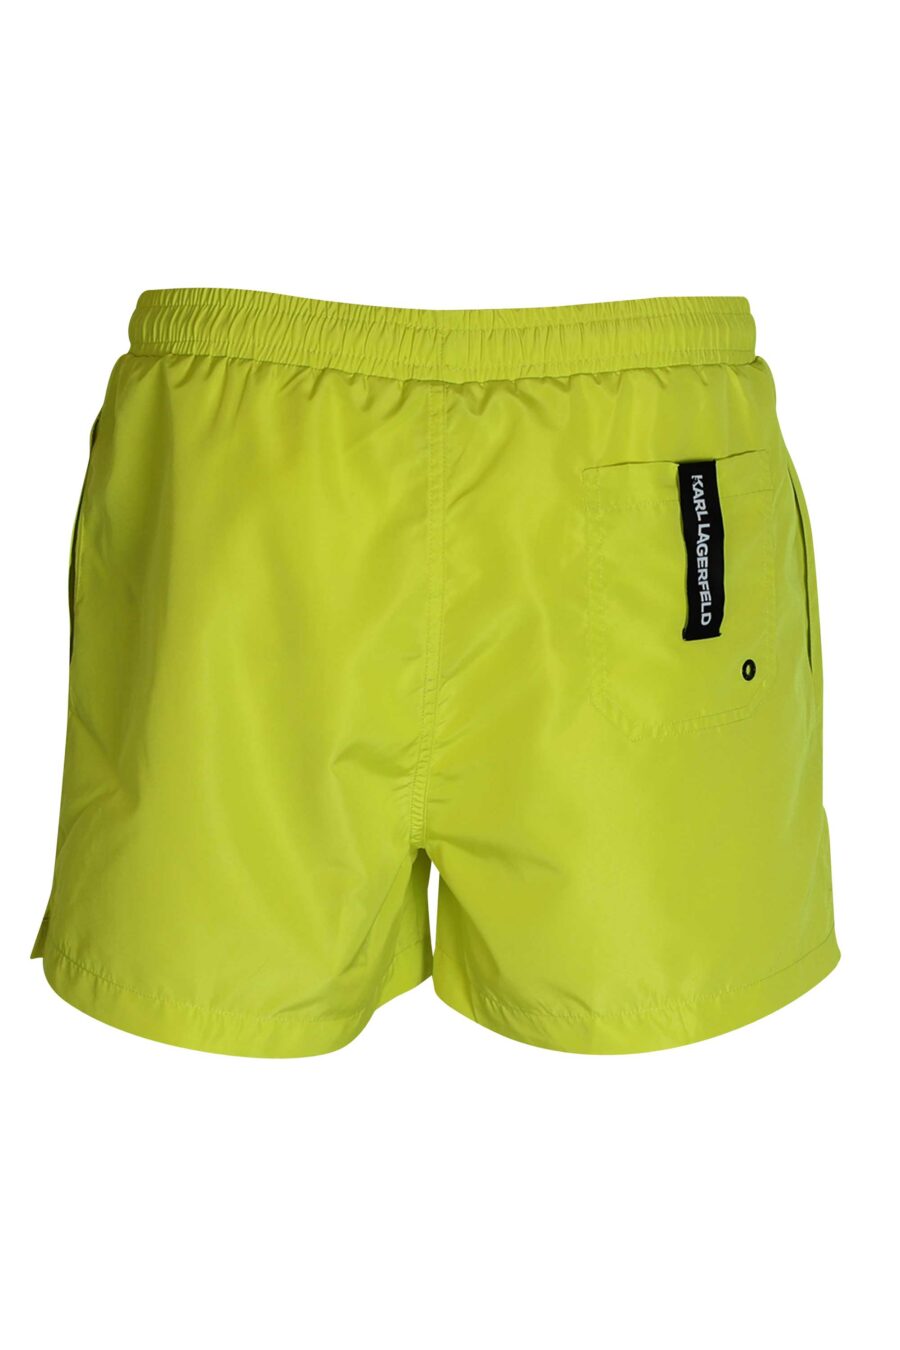 Lime green swimming costume with green side logo - 8720744217916 3